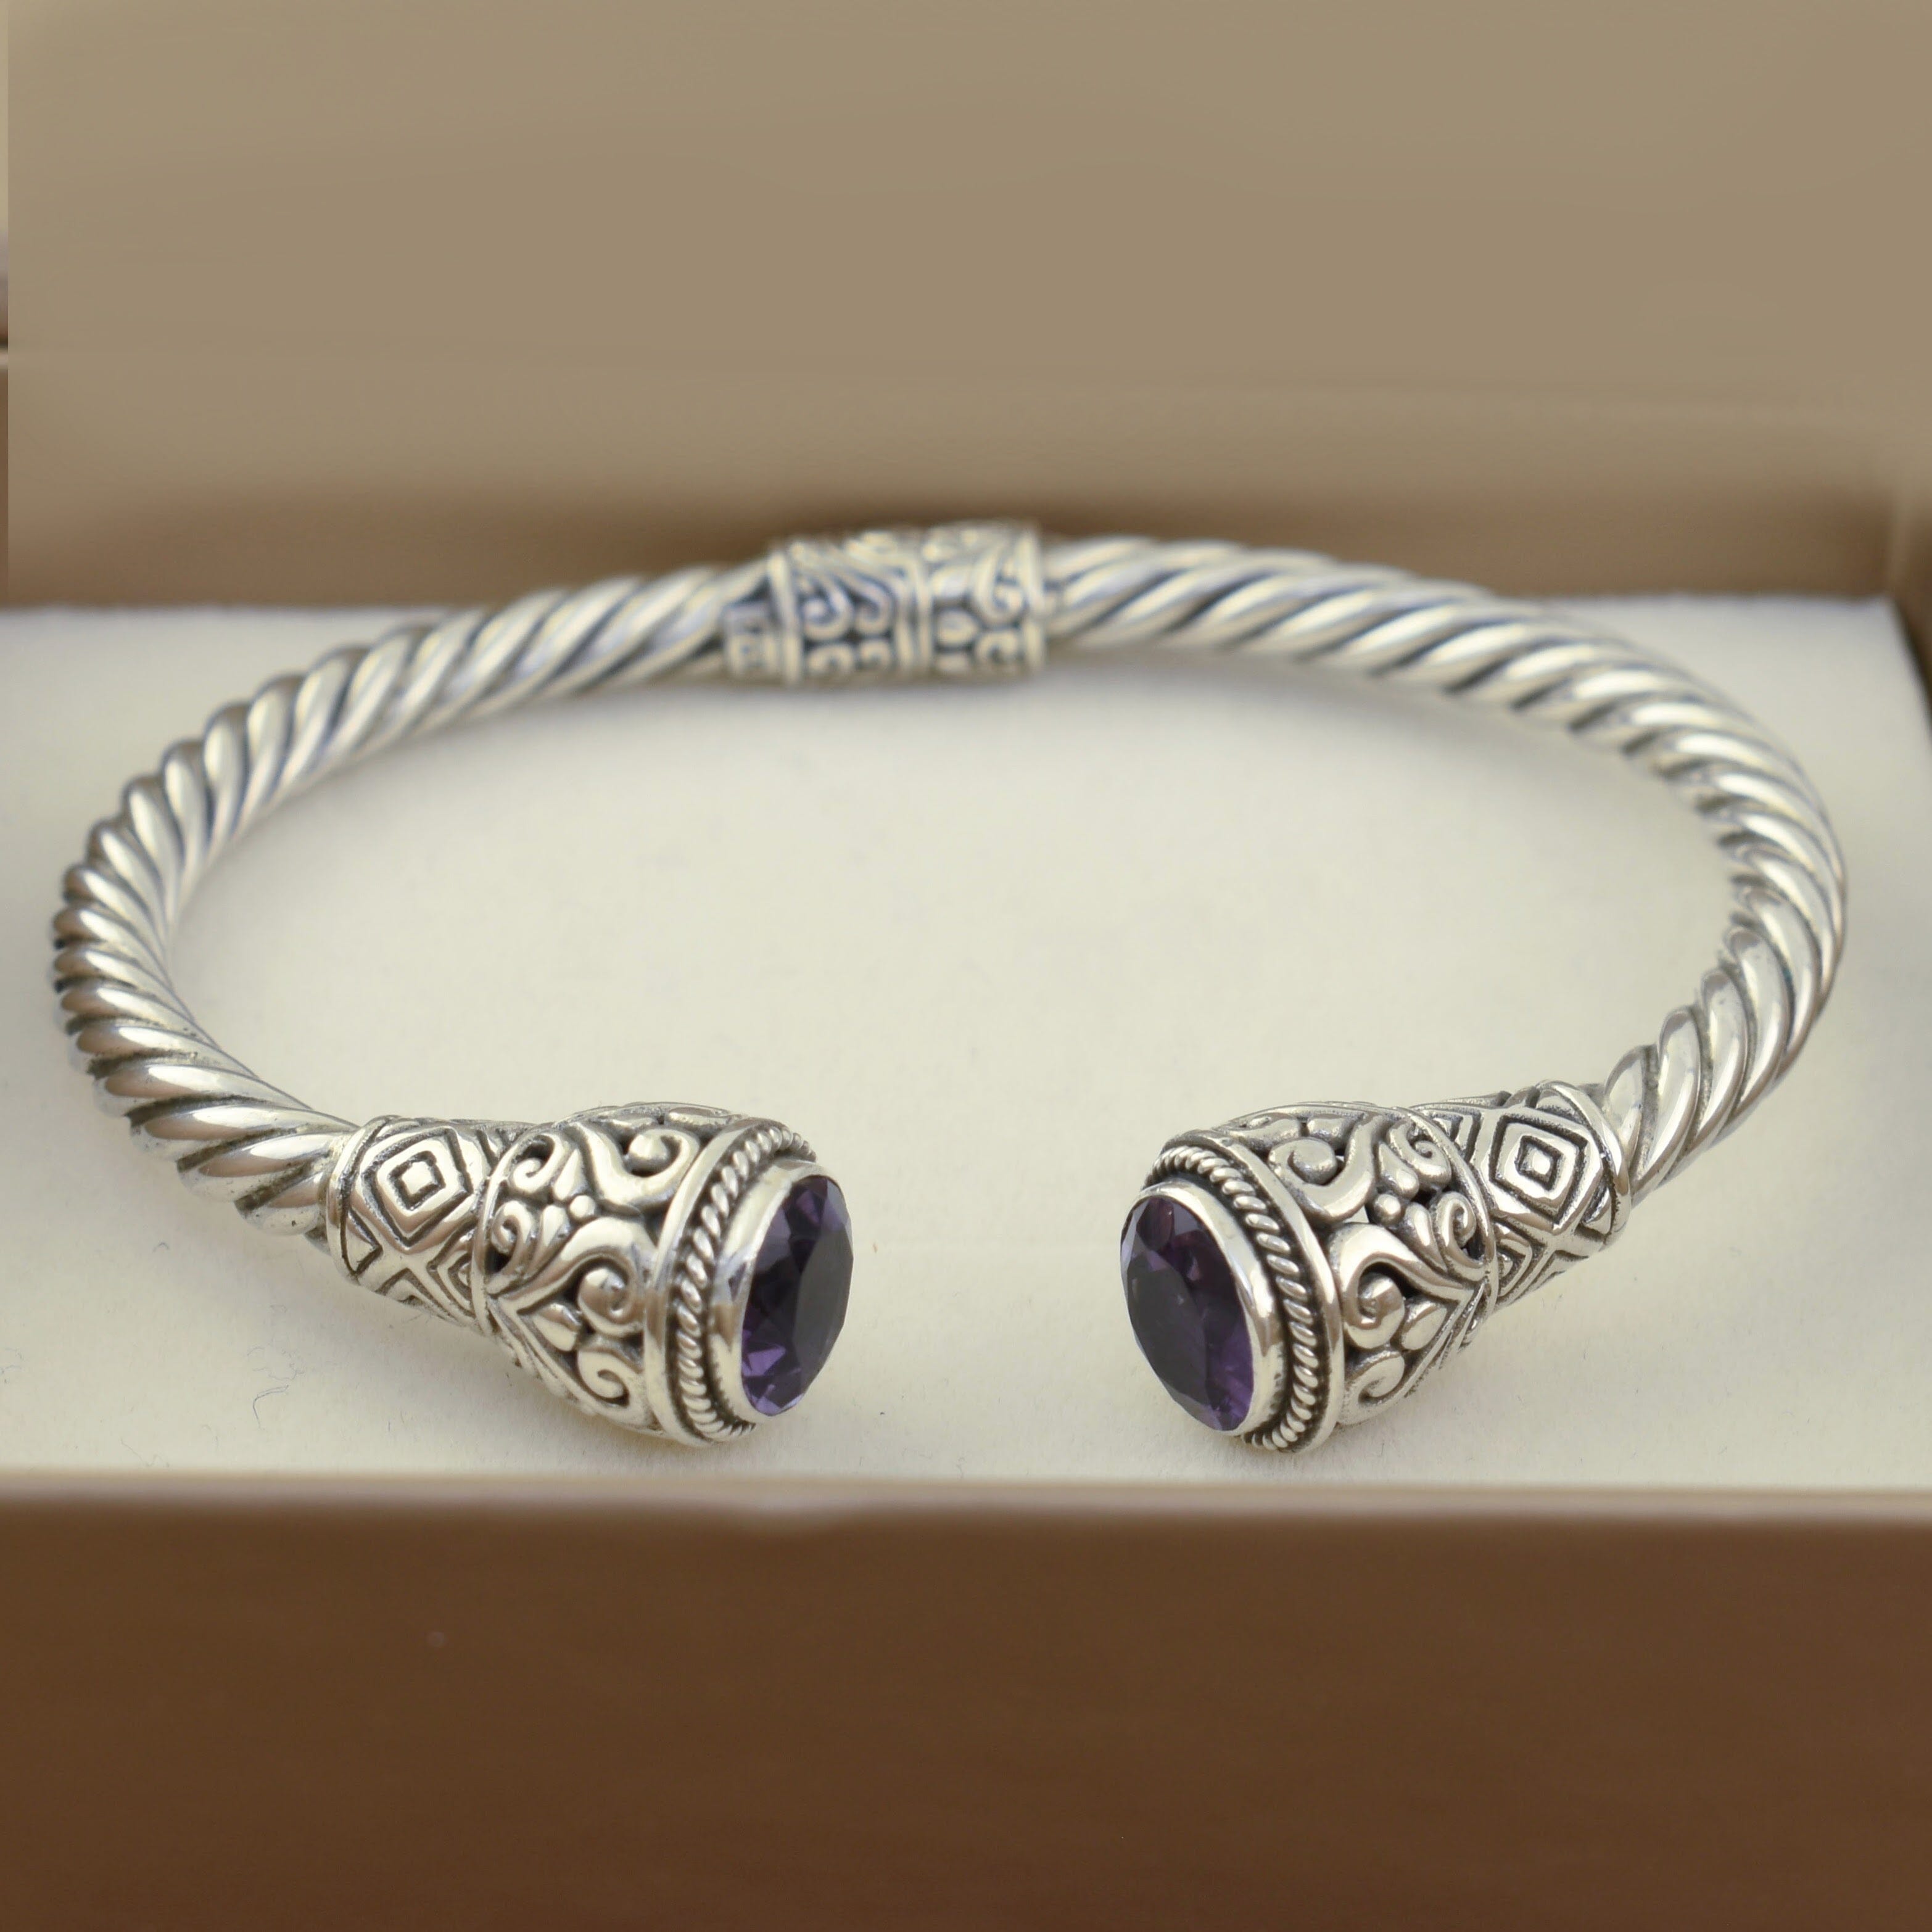 Chunky sterling silver cuff with genuine amethyst stones